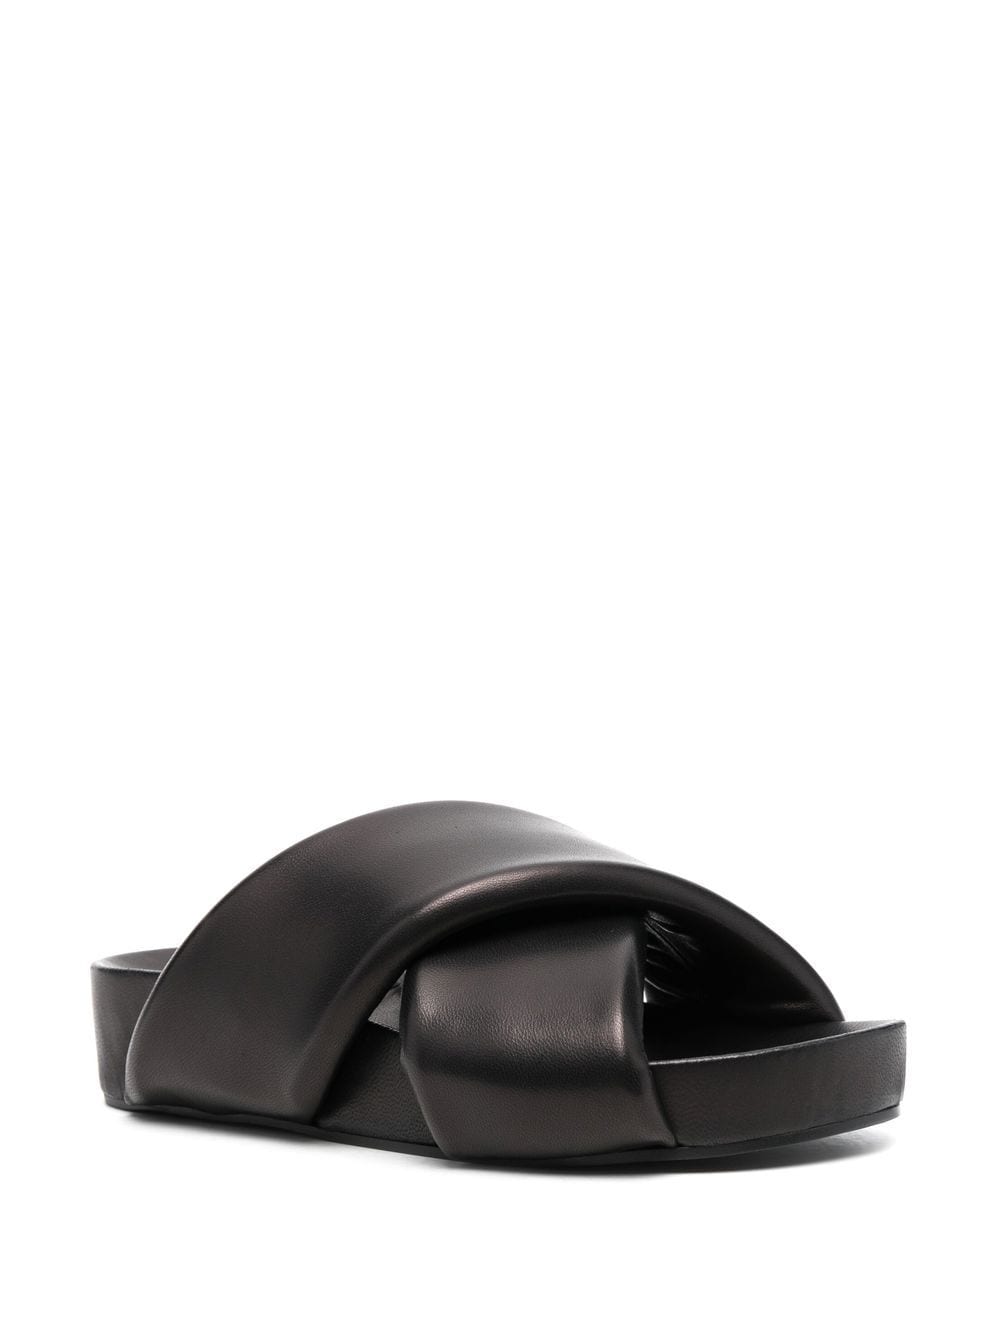 Band Sandal In Black Leather